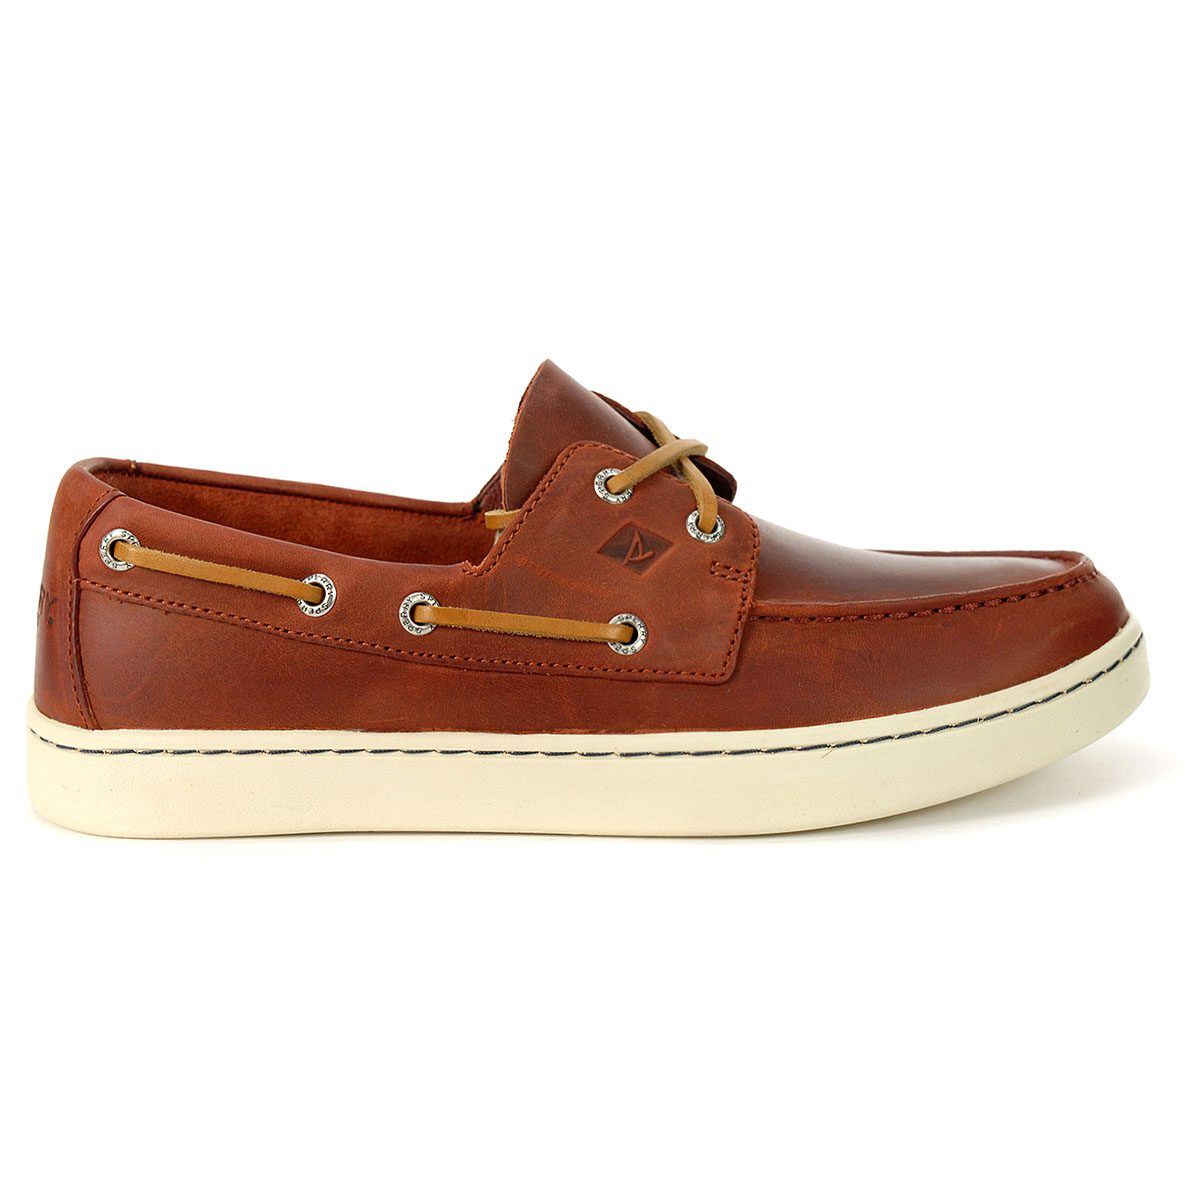 Sperry Top-Sider Men's Sperry Cup 2-Eye 